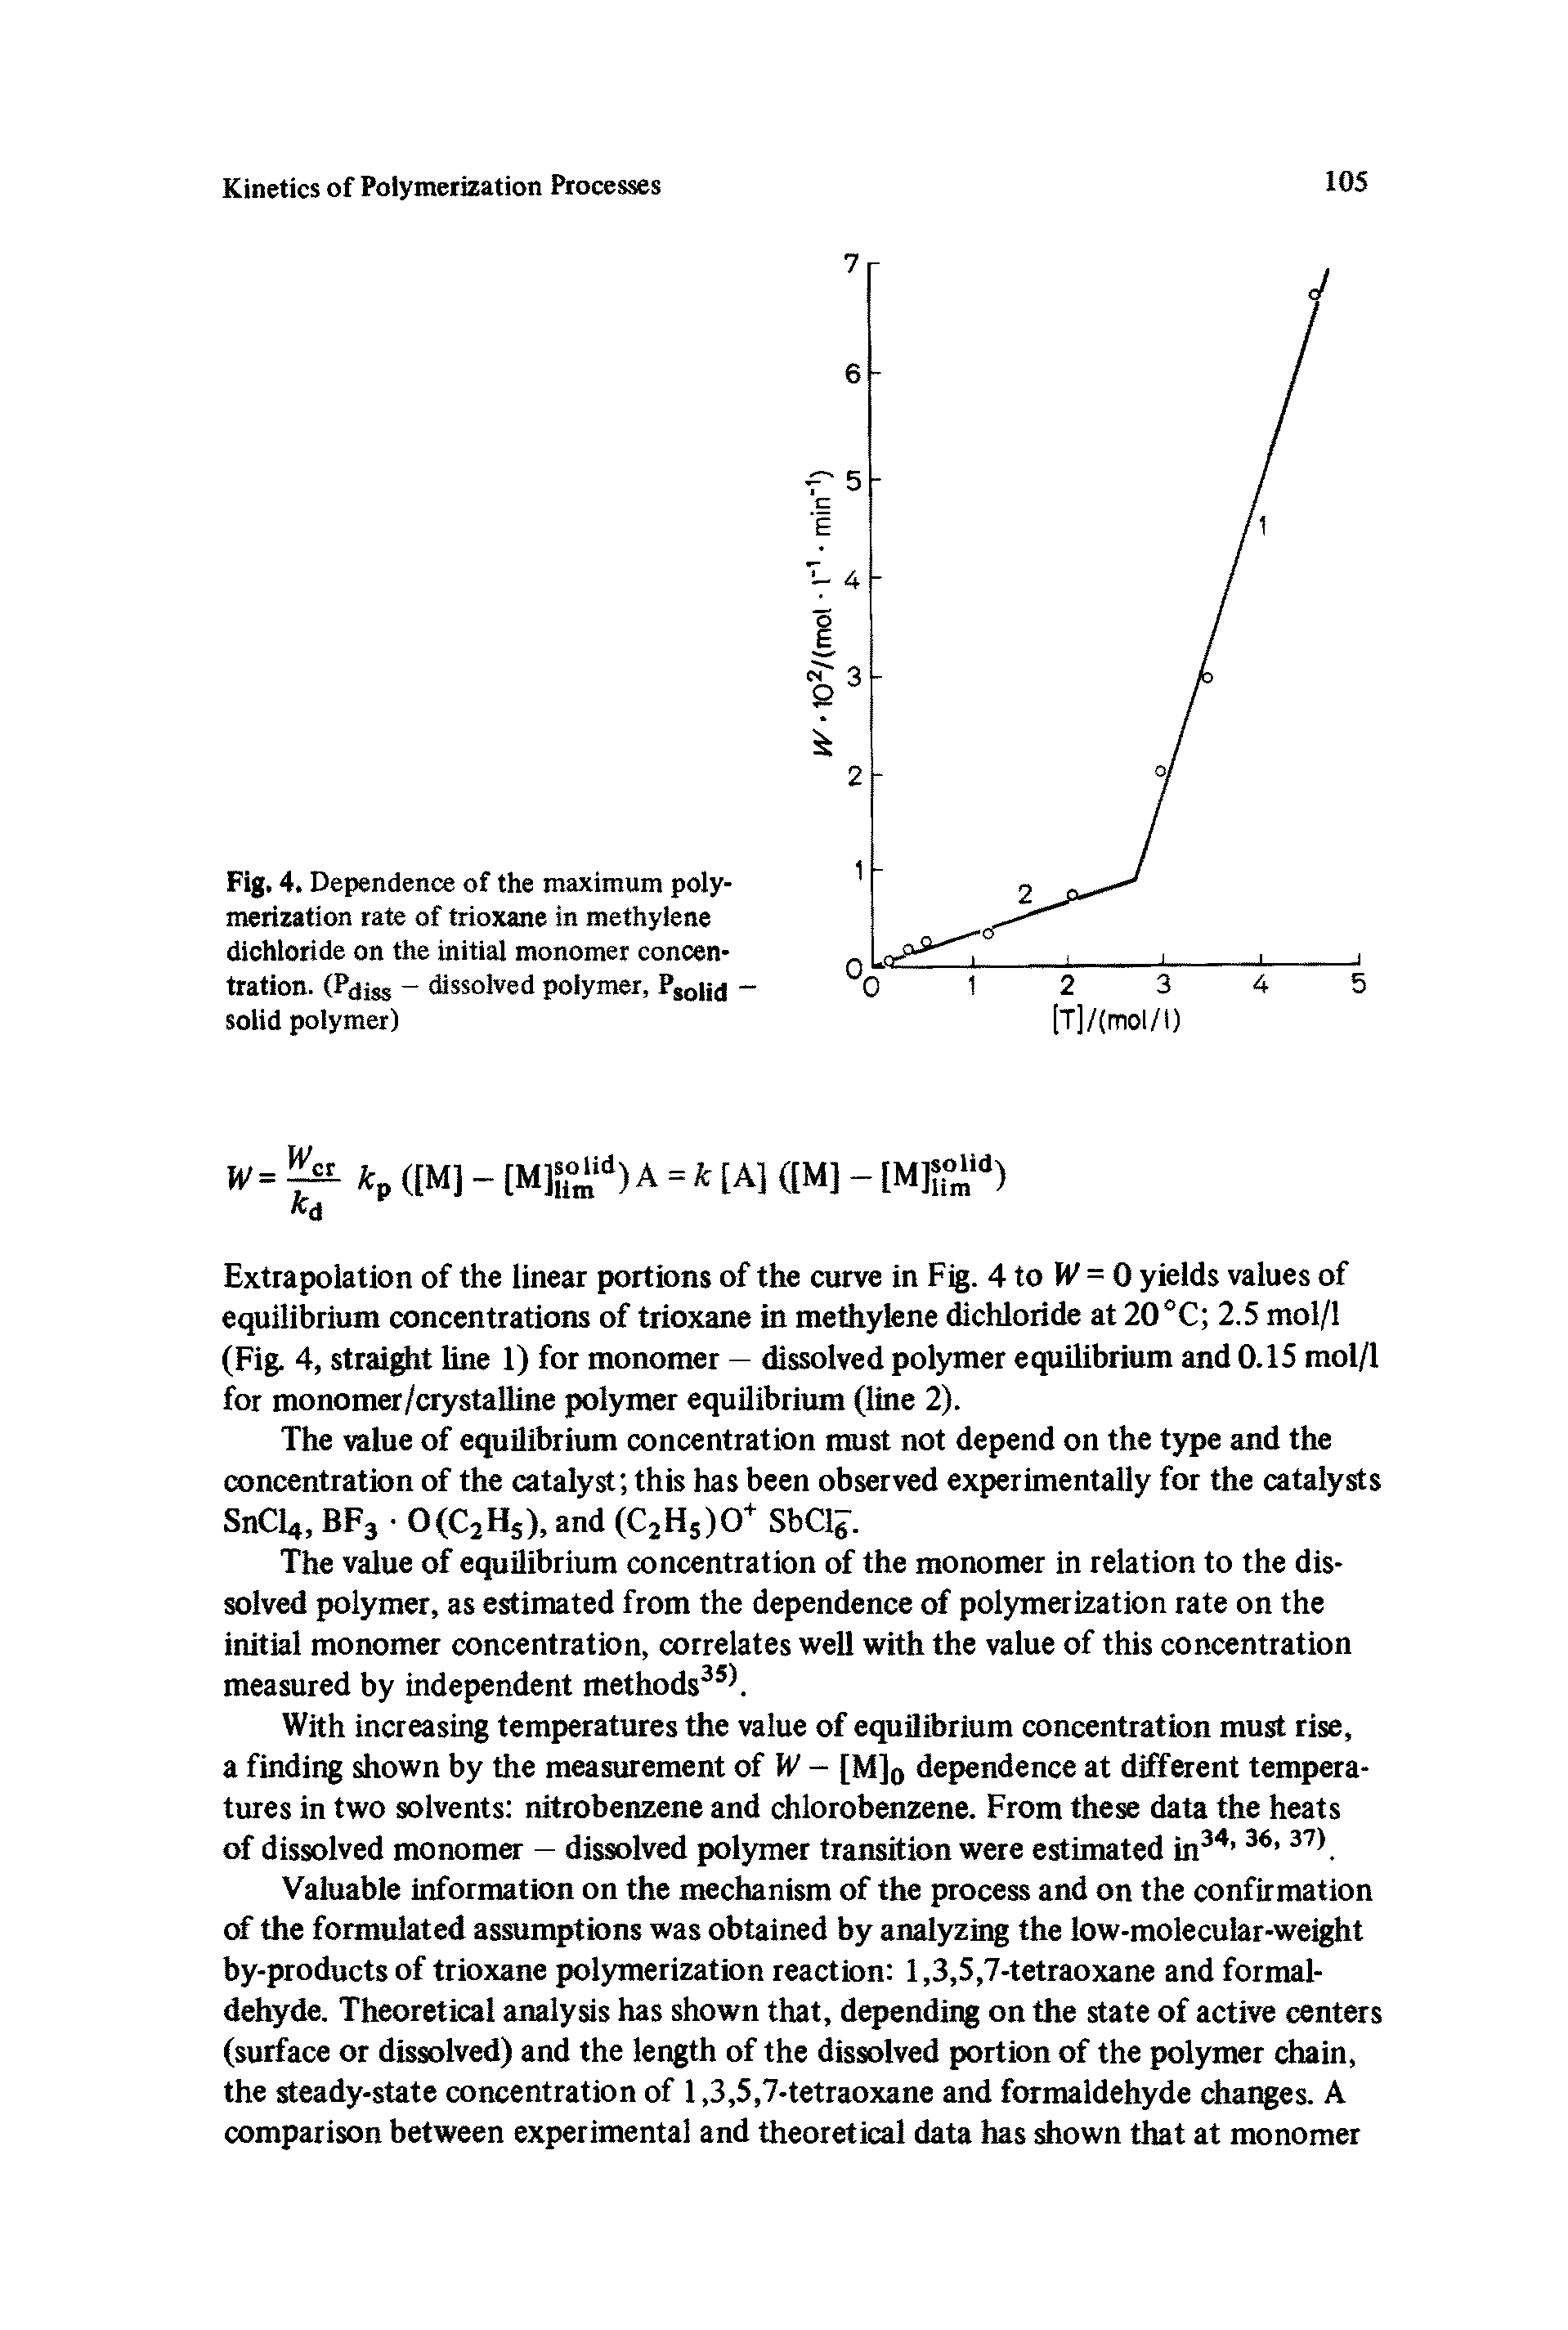 Fig. 4. Dependence of the maximum polymerization rate of trioxane in methylene dichloride on the initial monomer concentration. (Pdiss dissolved polymer, Psoh<j -solid polymer)...